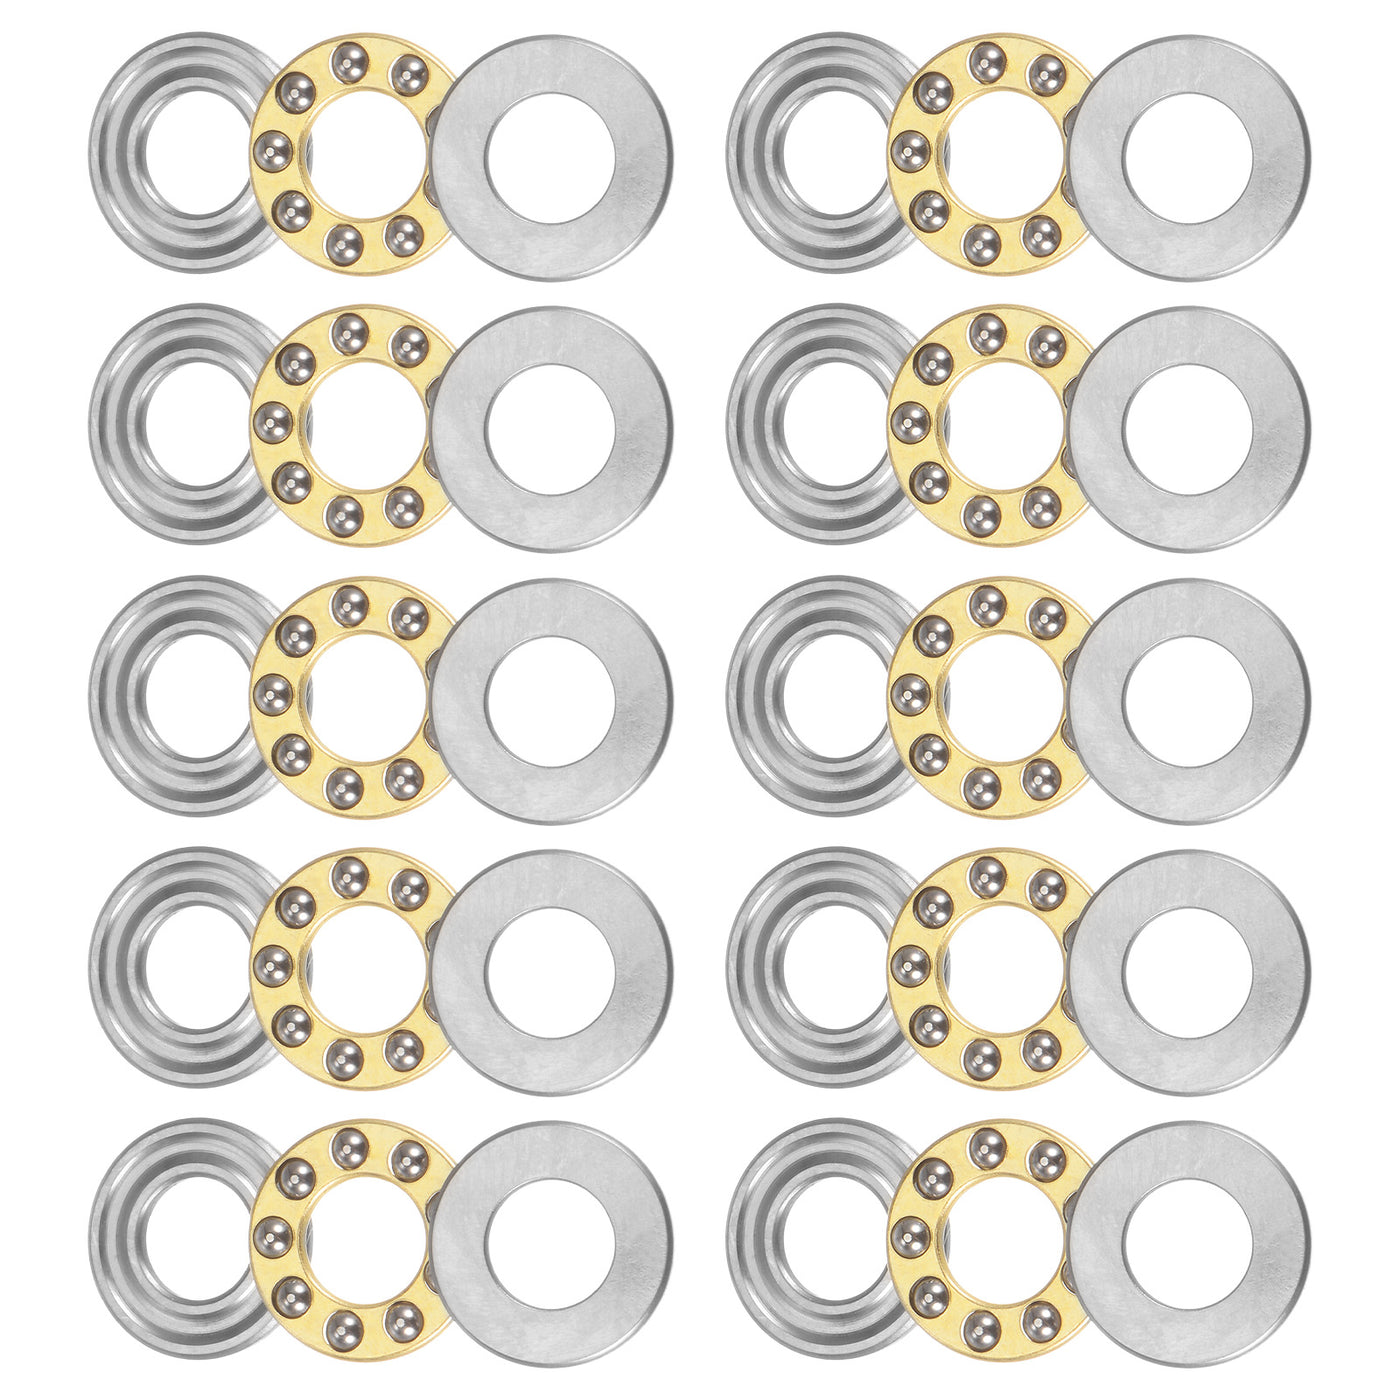 uxcell Uxcell F8-16M Thrust Ball Bearing 8x16x5mm Brass with Washers 10pcs